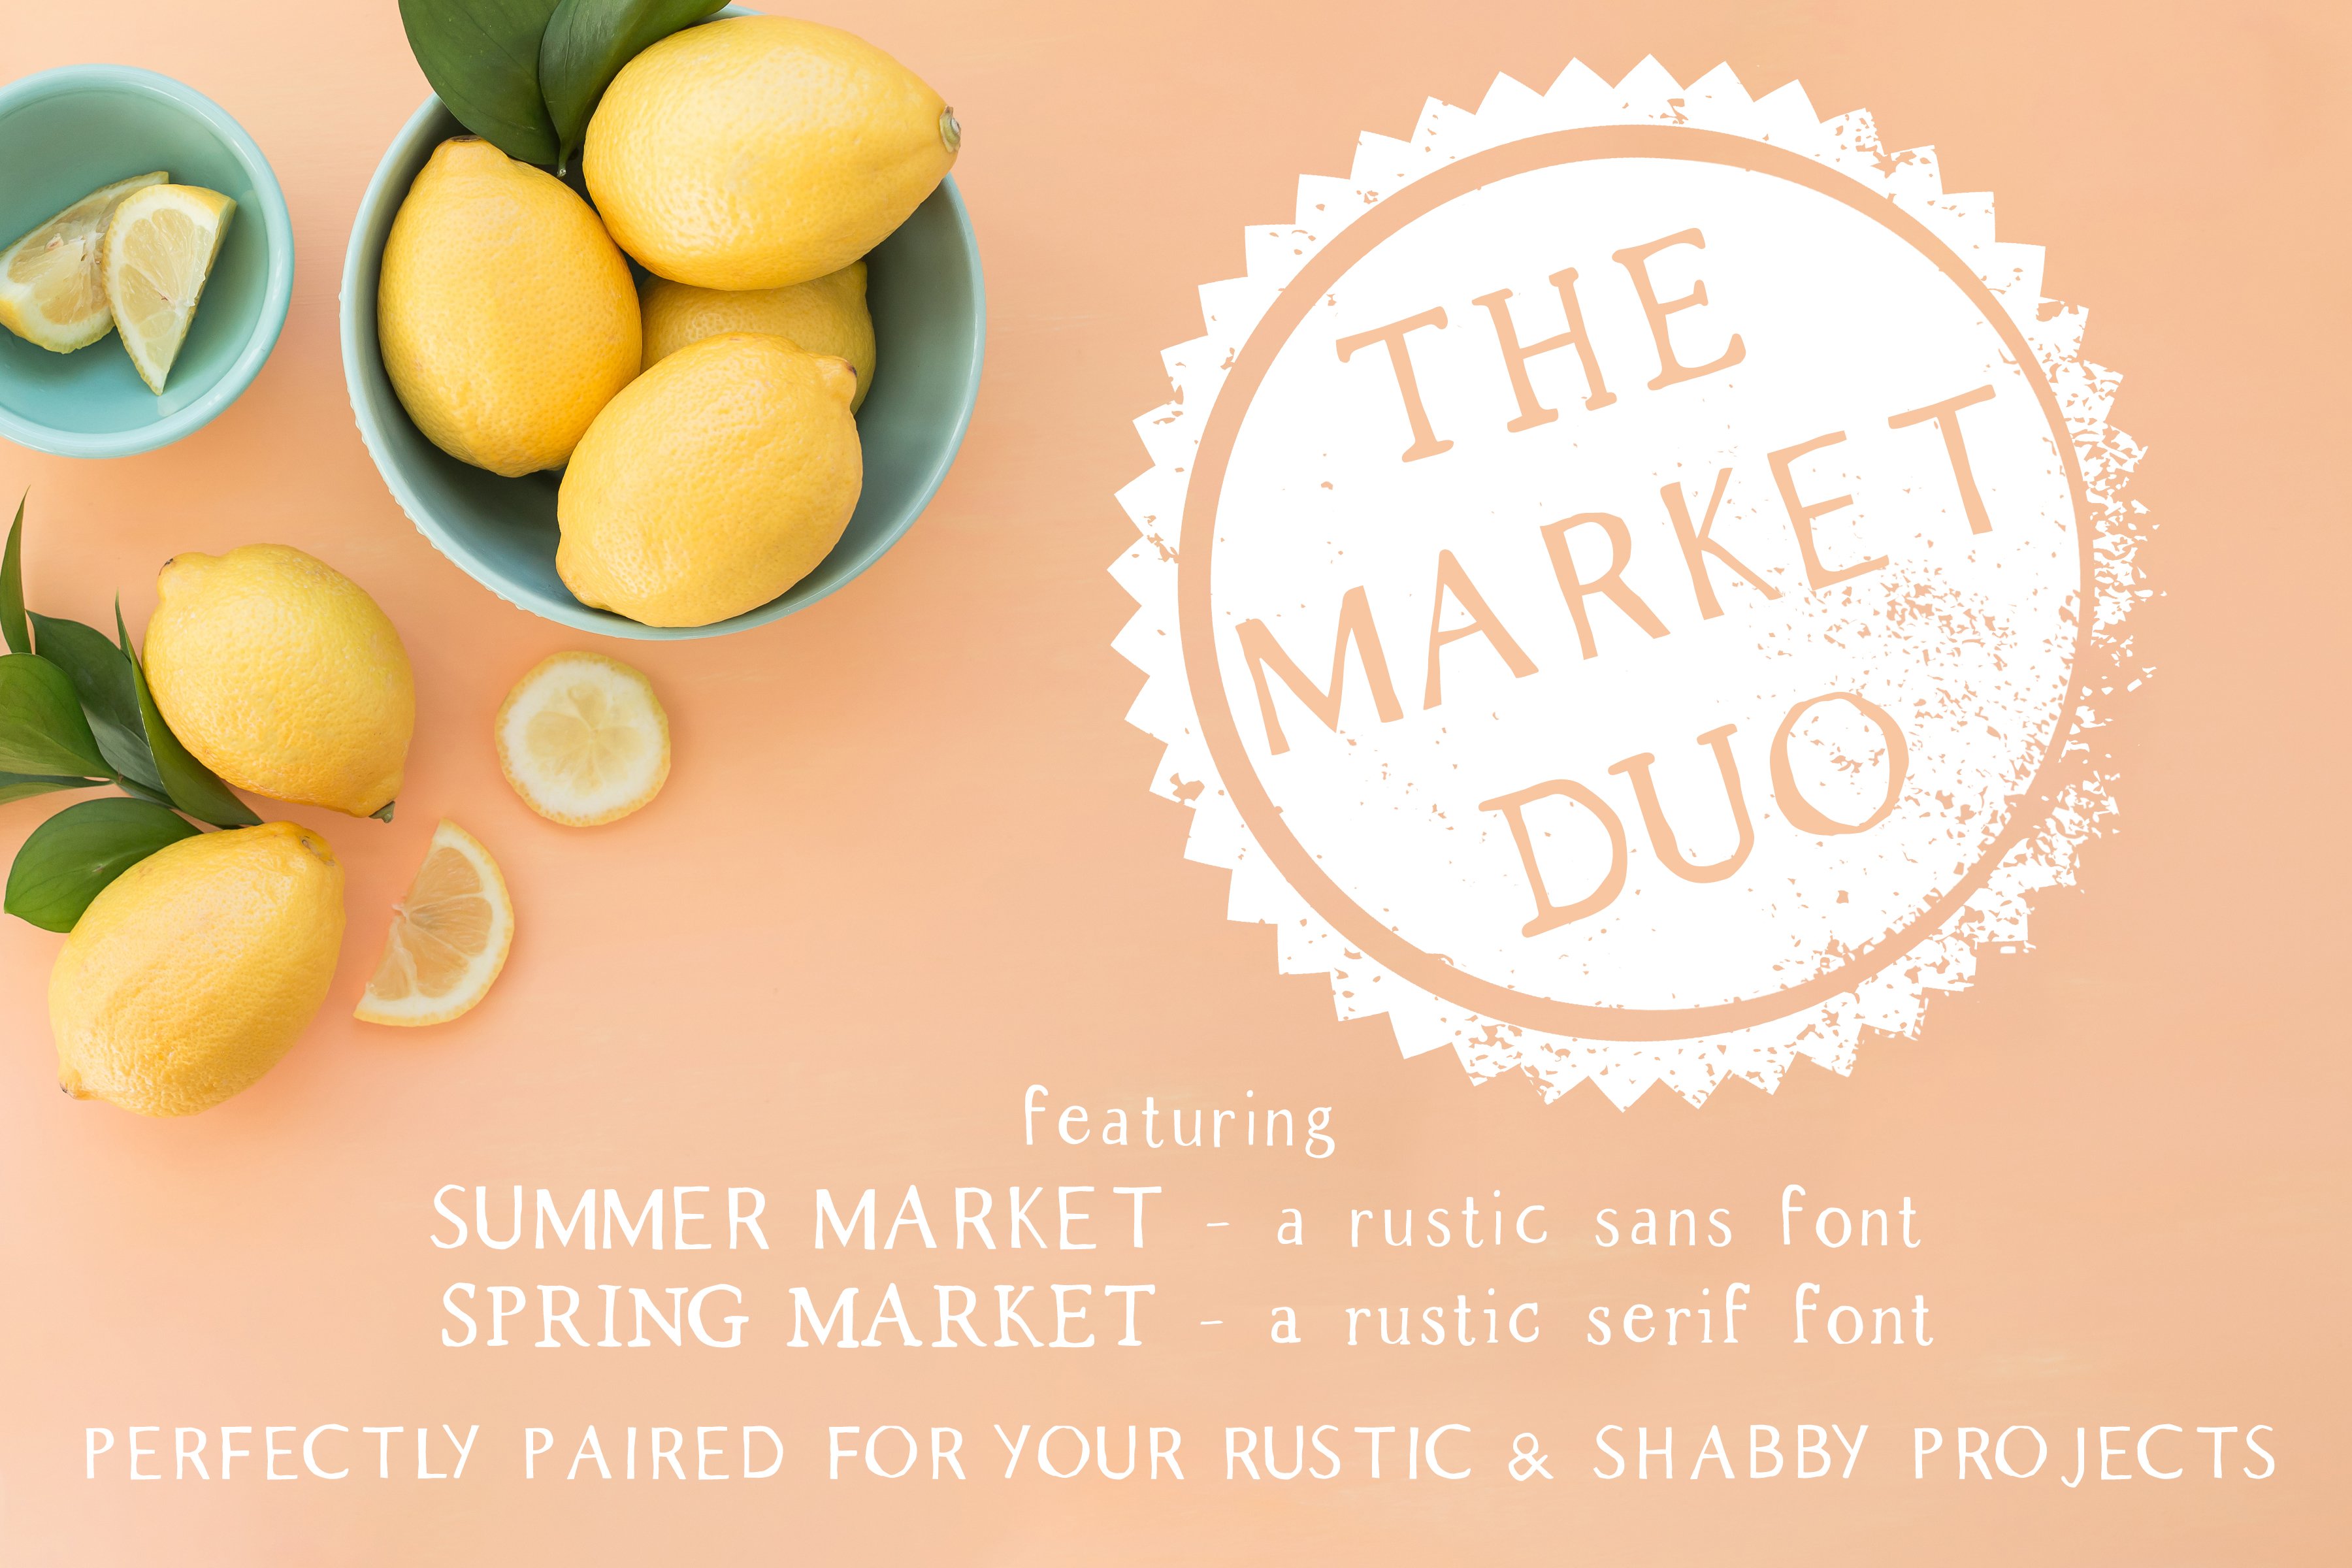 The Market Duo - Rustic Font cover image.